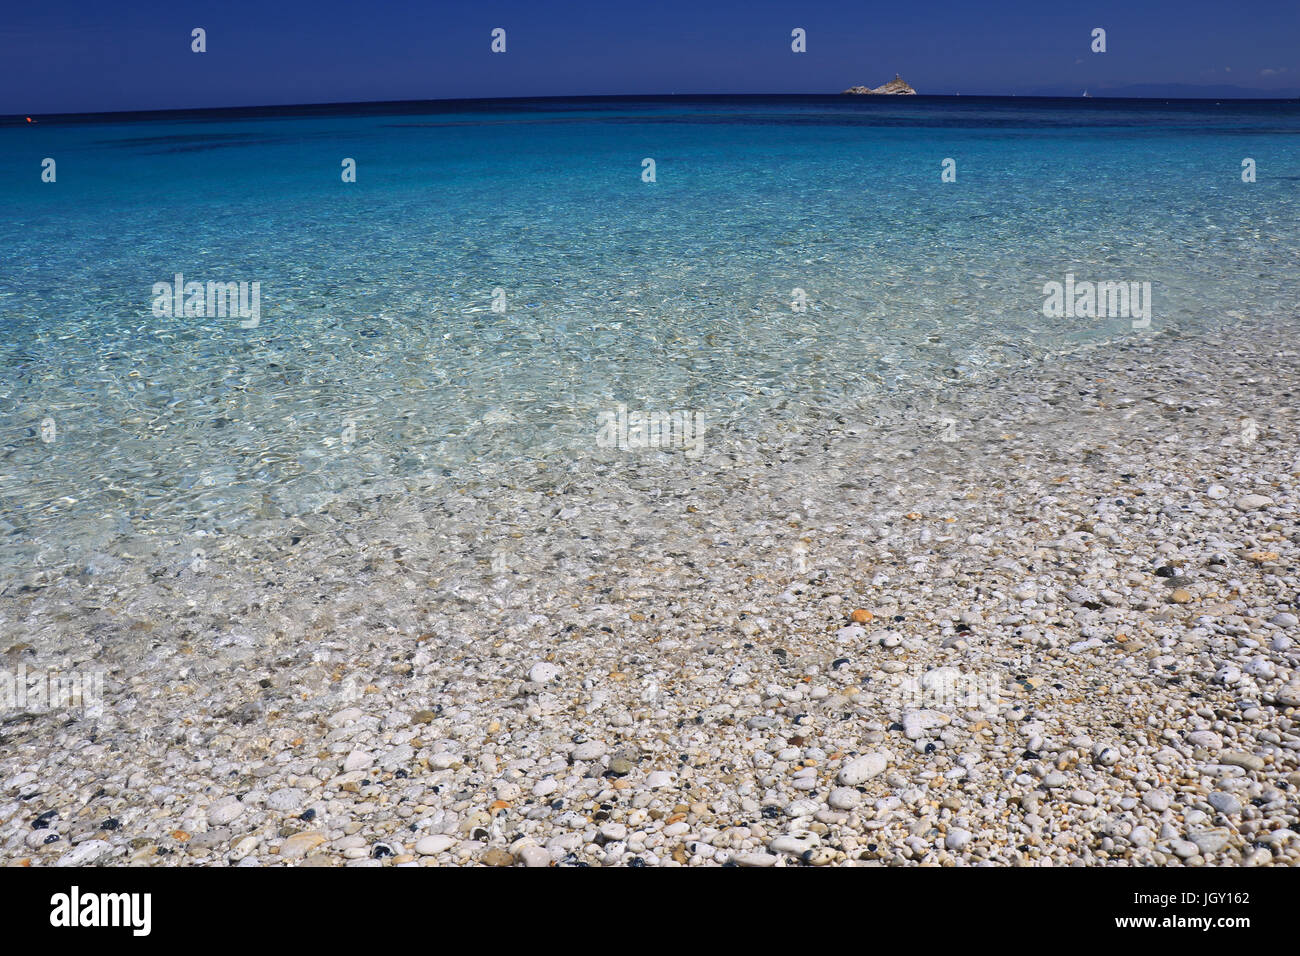 Blue Sea water background Banque D'Images